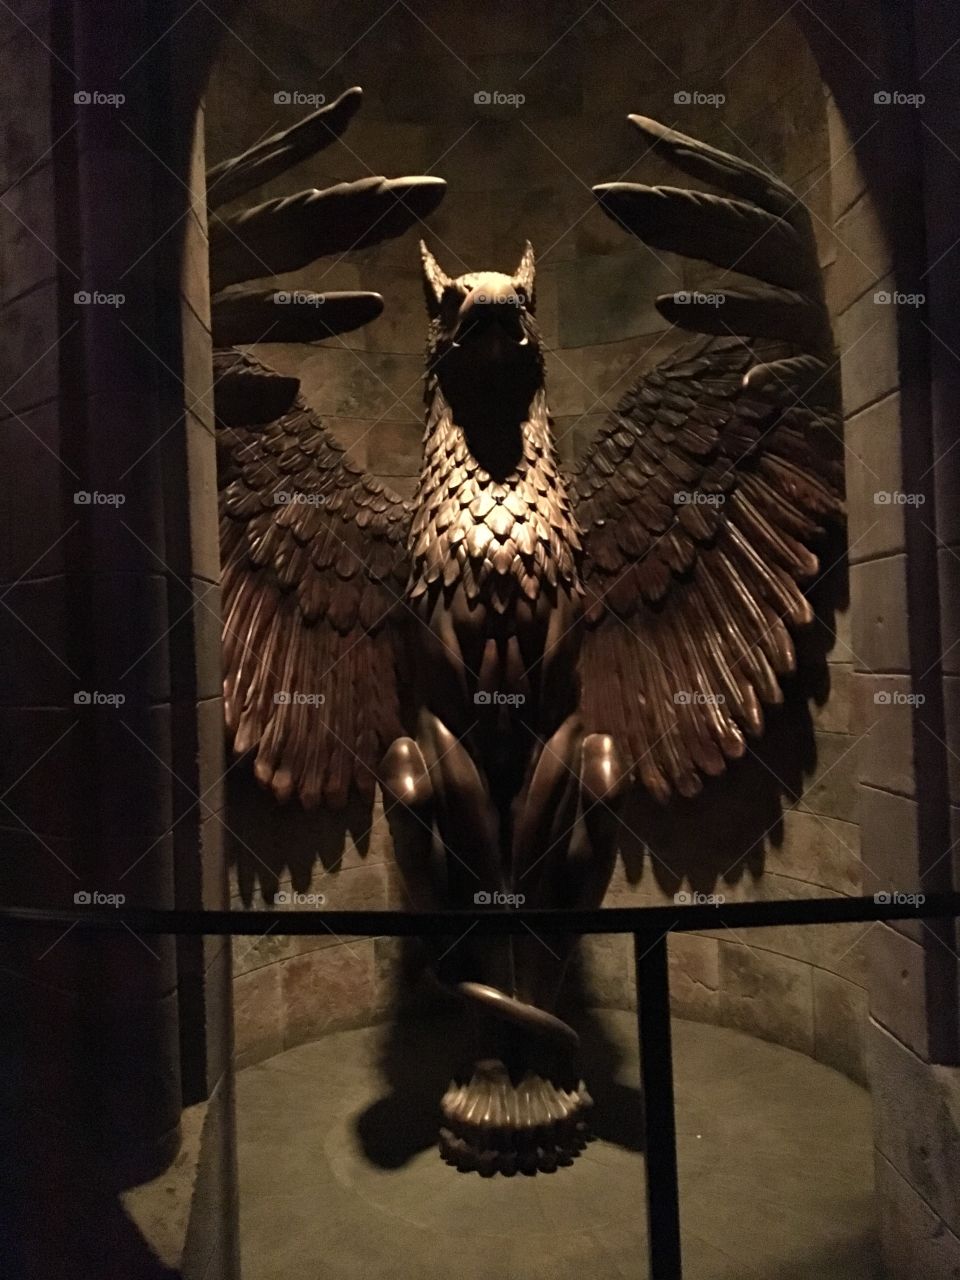 Universal Studios’ Entrance to Dumbledore’s office